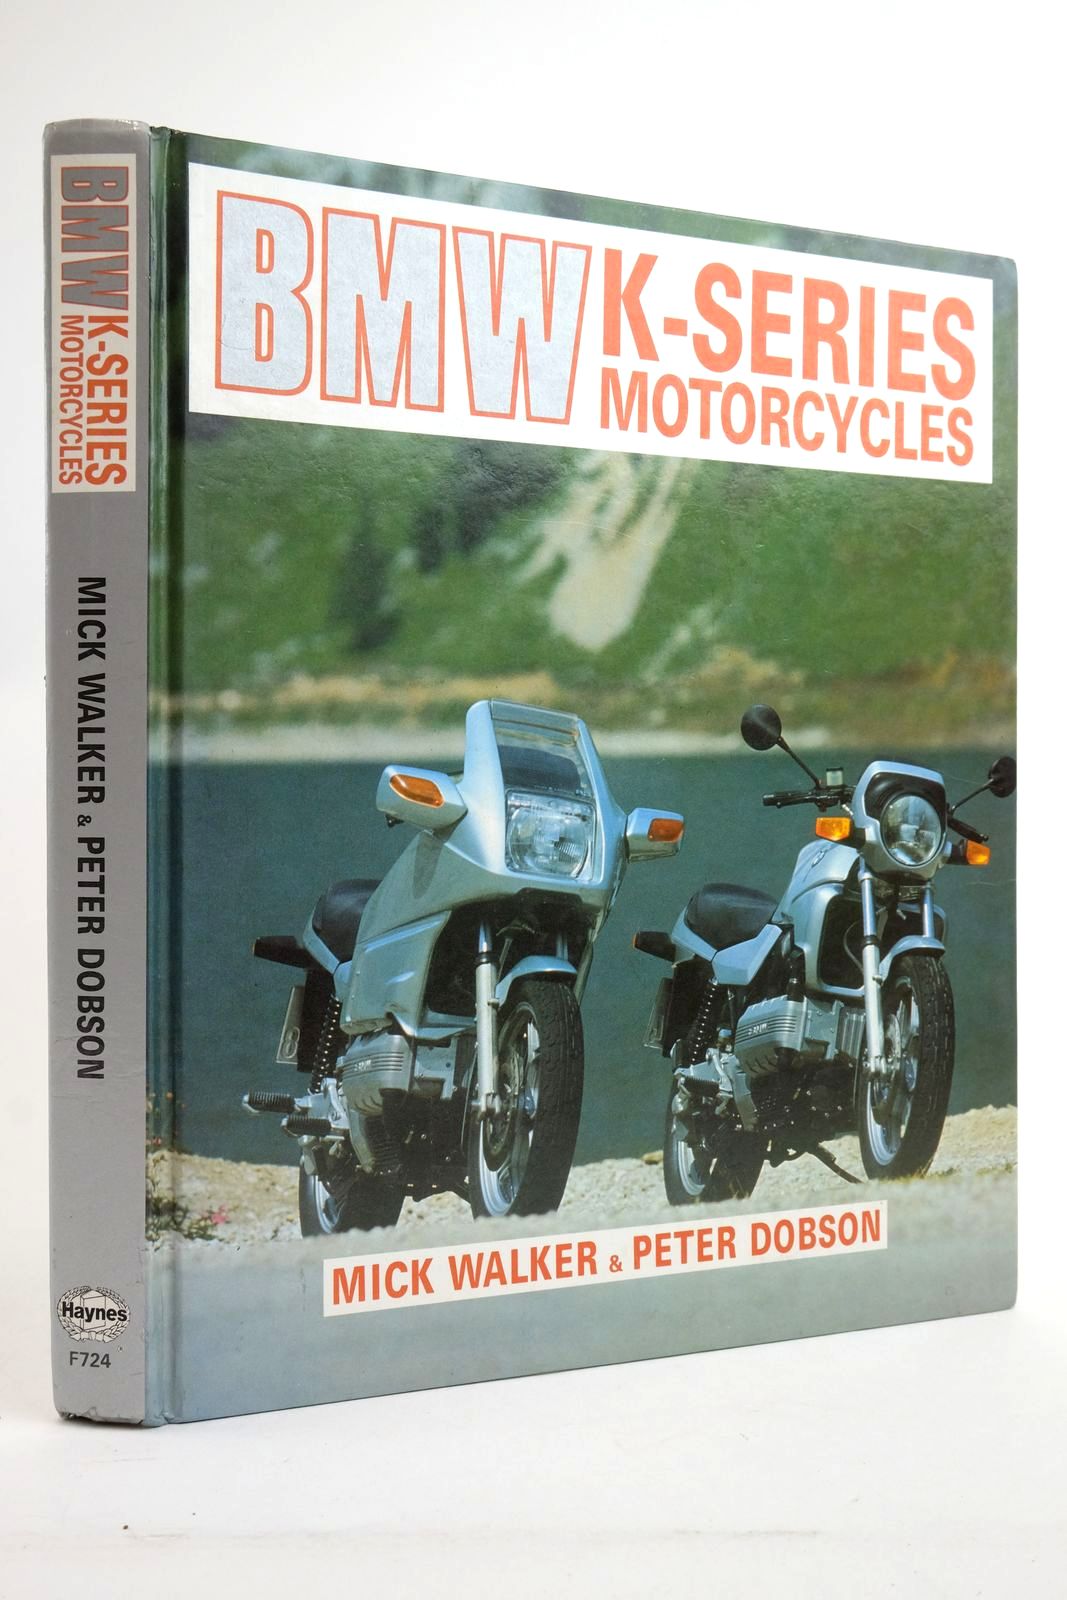 Photo of BMW K-SERIES MOTORCYCLES written by Walker, Mick Dobson, Peter published by Haynes Publishing Group (STOCK CODE: 2135685)  for sale by Stella & Rose's Books